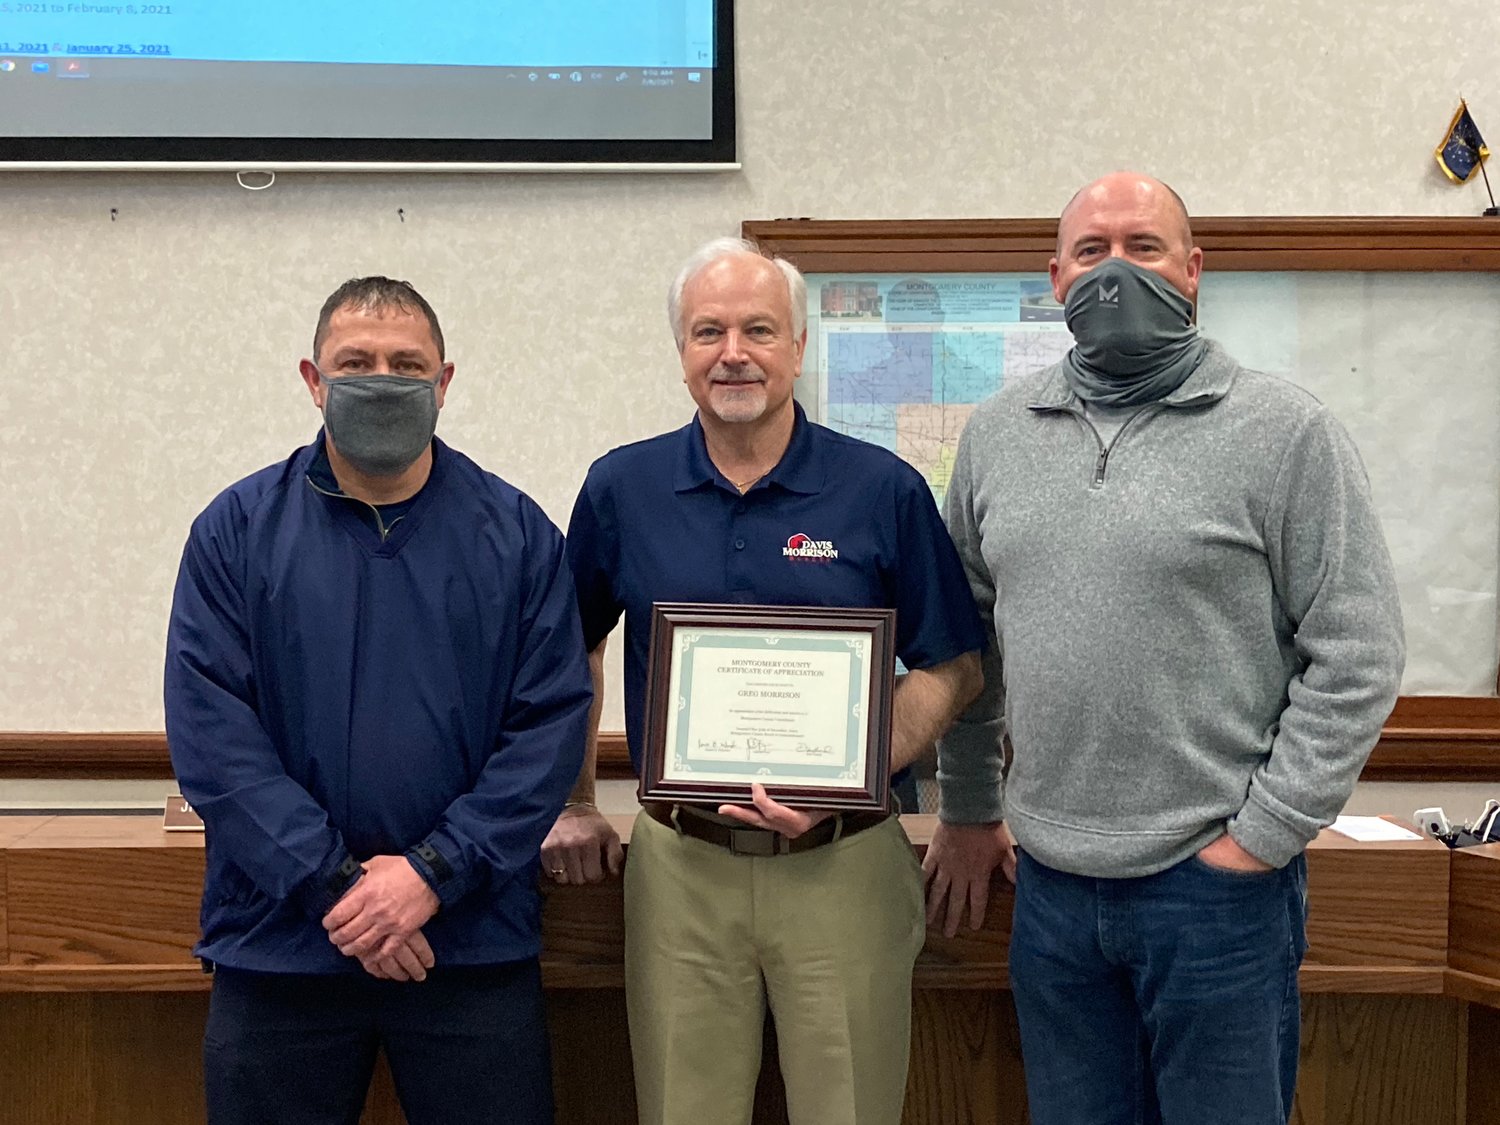 Former Montgomery County Councilman Greg Morrison, center, accepts a certificate of appreciation from the Board of Commissioners. Also pictured are commissioners Jim Fulwider and Dan Guard. The commissioners recognized Morrison and former Montgomery Superior Court 2 Judge Peggy Lohorn for their service to the county.